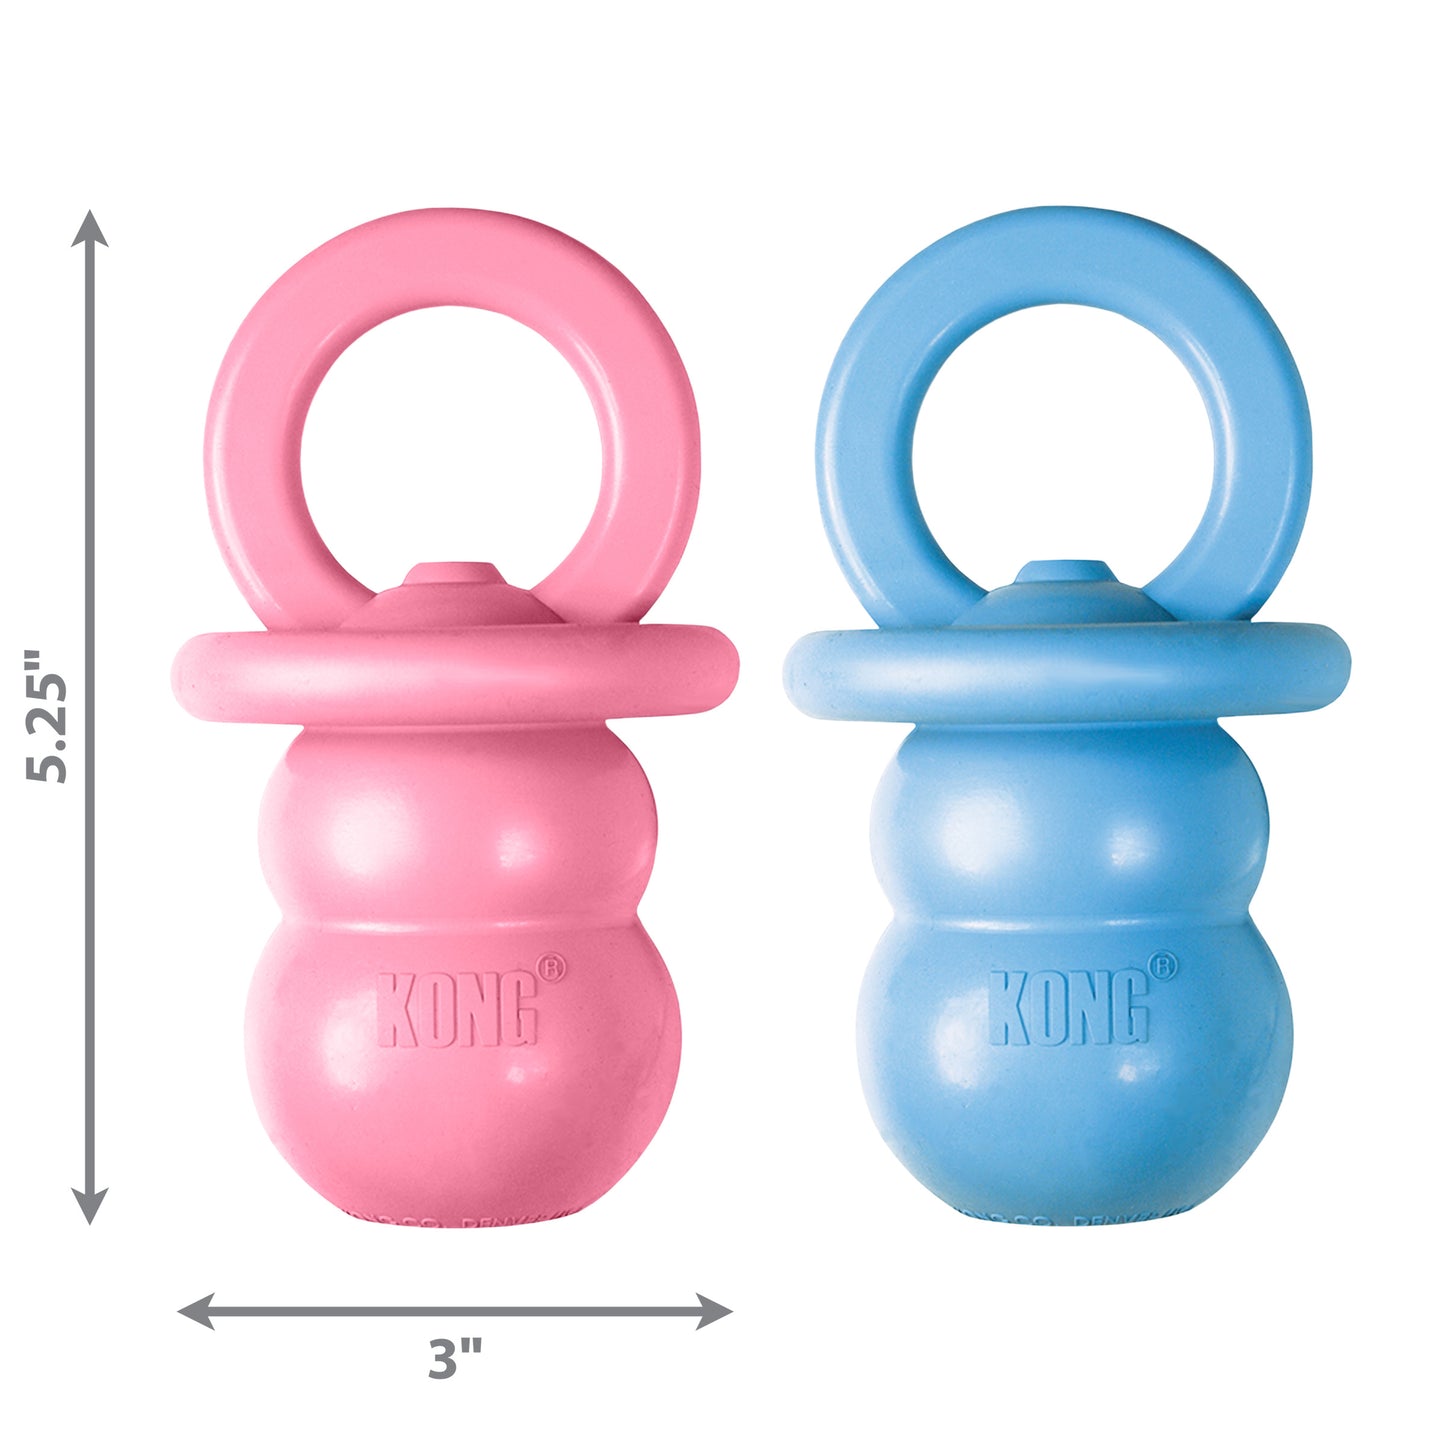 A pink and blue SALE: KONG Puppy Binkie pacifier toy with measurements. Brand Name: Your Whole Dog.